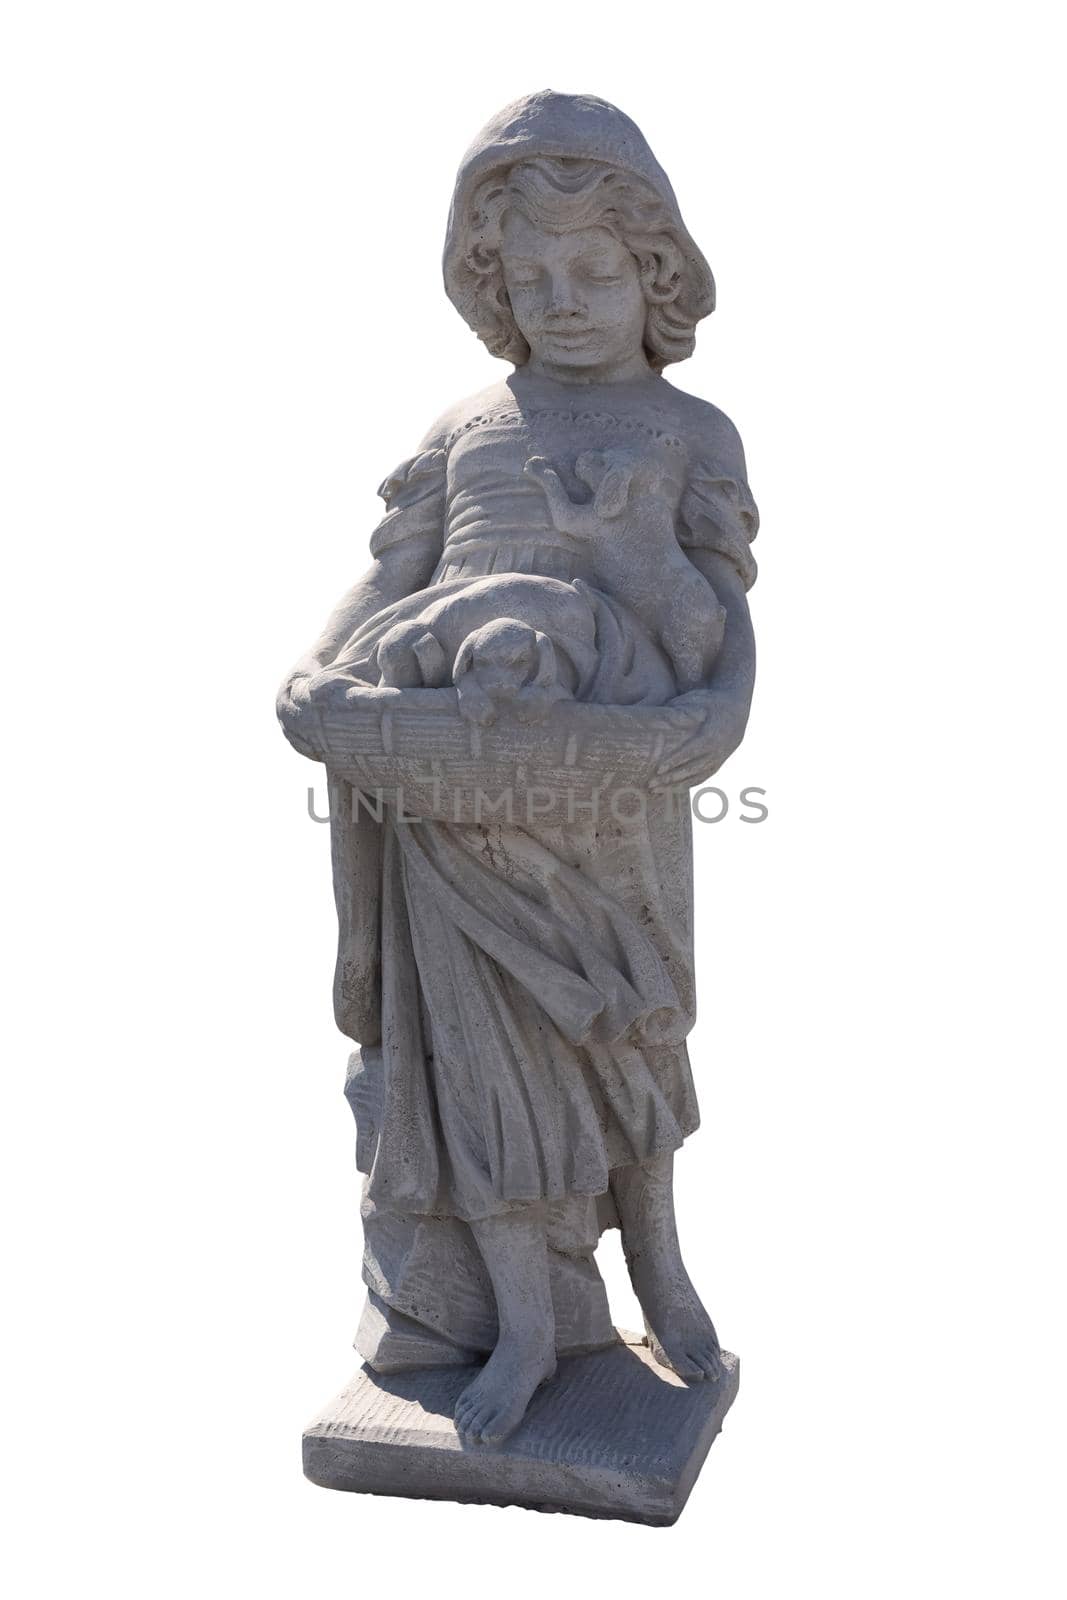 Stone sculpture of girl holding puppies in basket on white background. art and classical style romantic figurative stone sculpture.